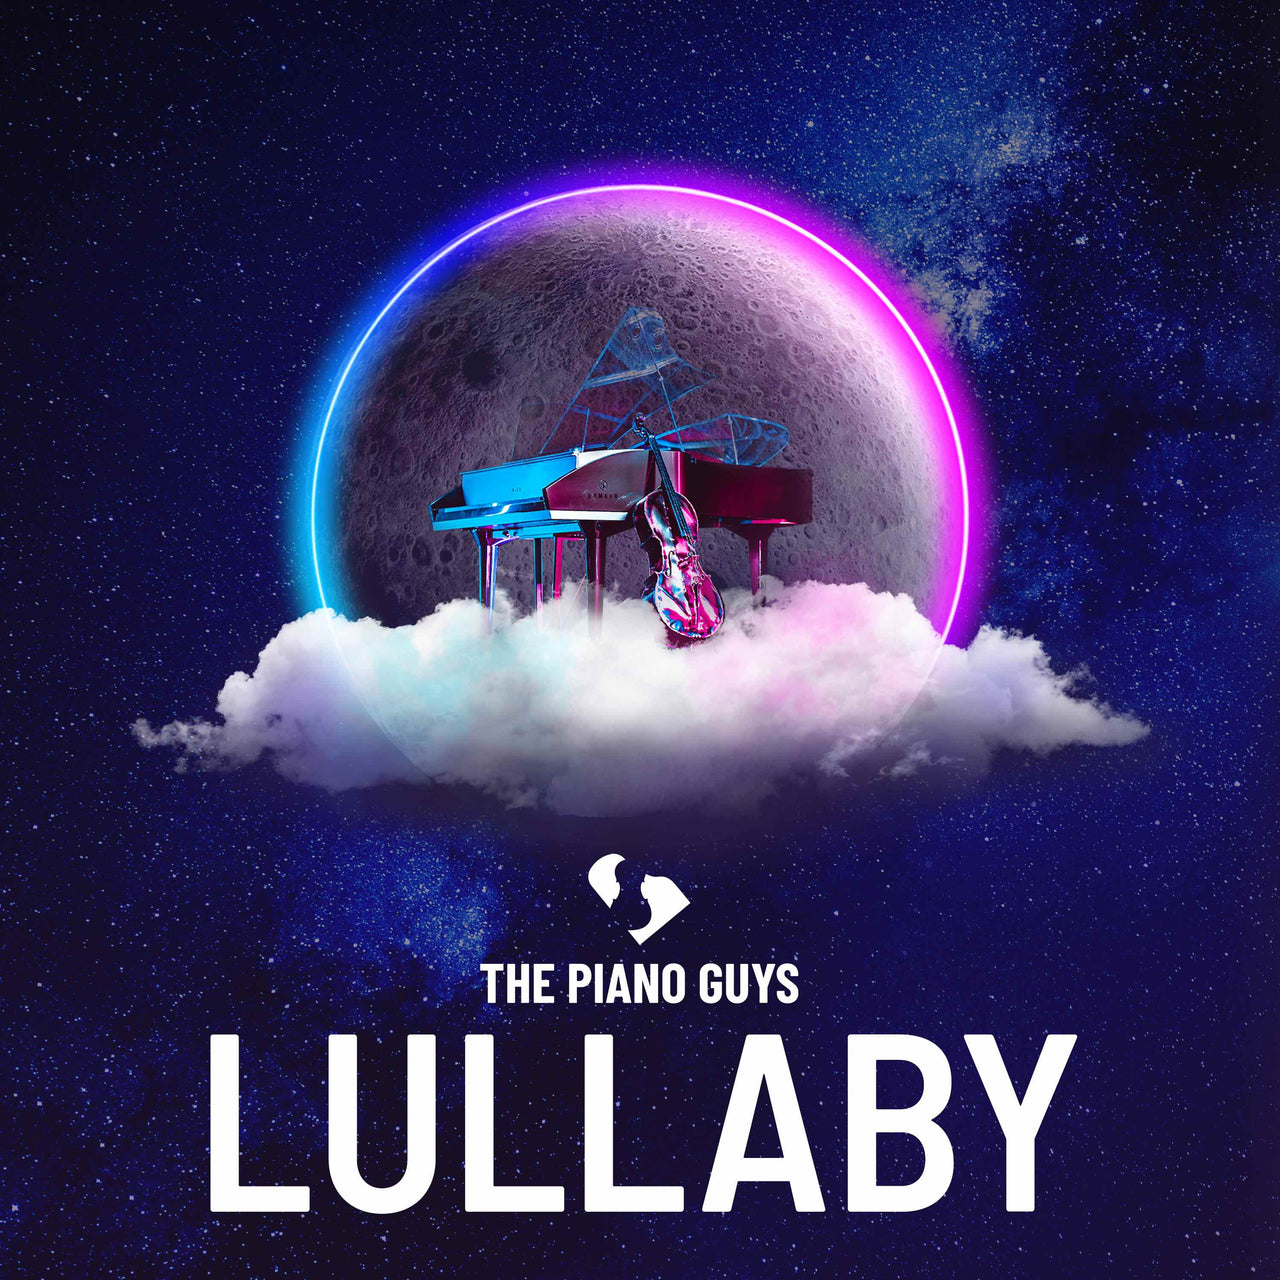 The Piano Guys "LULLABY"